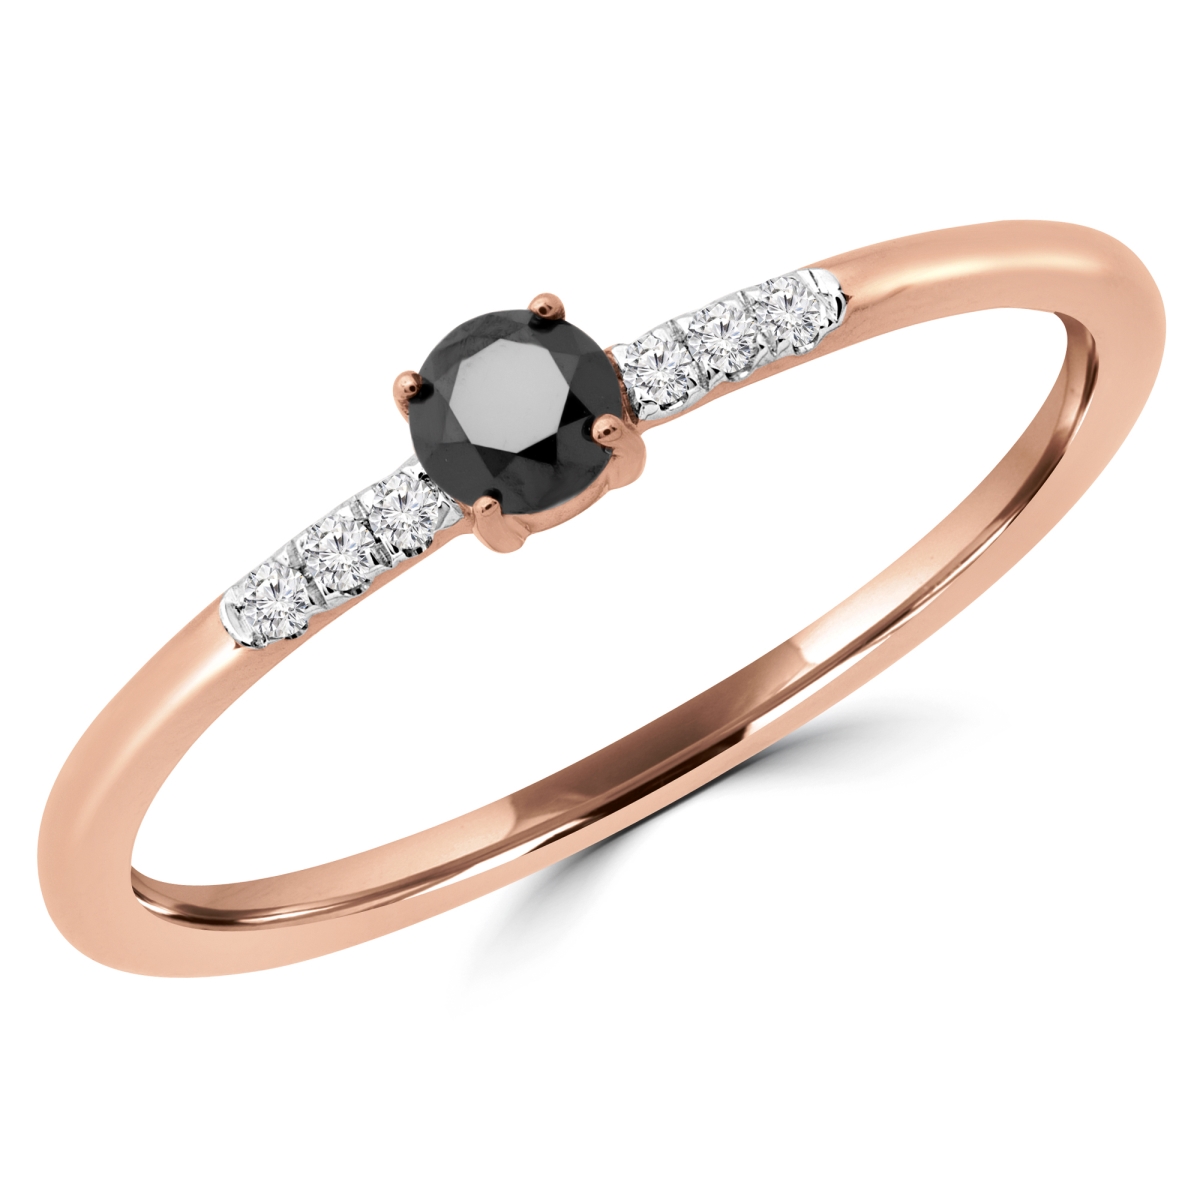 Picture of Majesty Diamonds MDR190079-6 0.16 CTW Round Black Diamond Bezel Set Cocktail Ring in 14K Rose Gold - Size 6